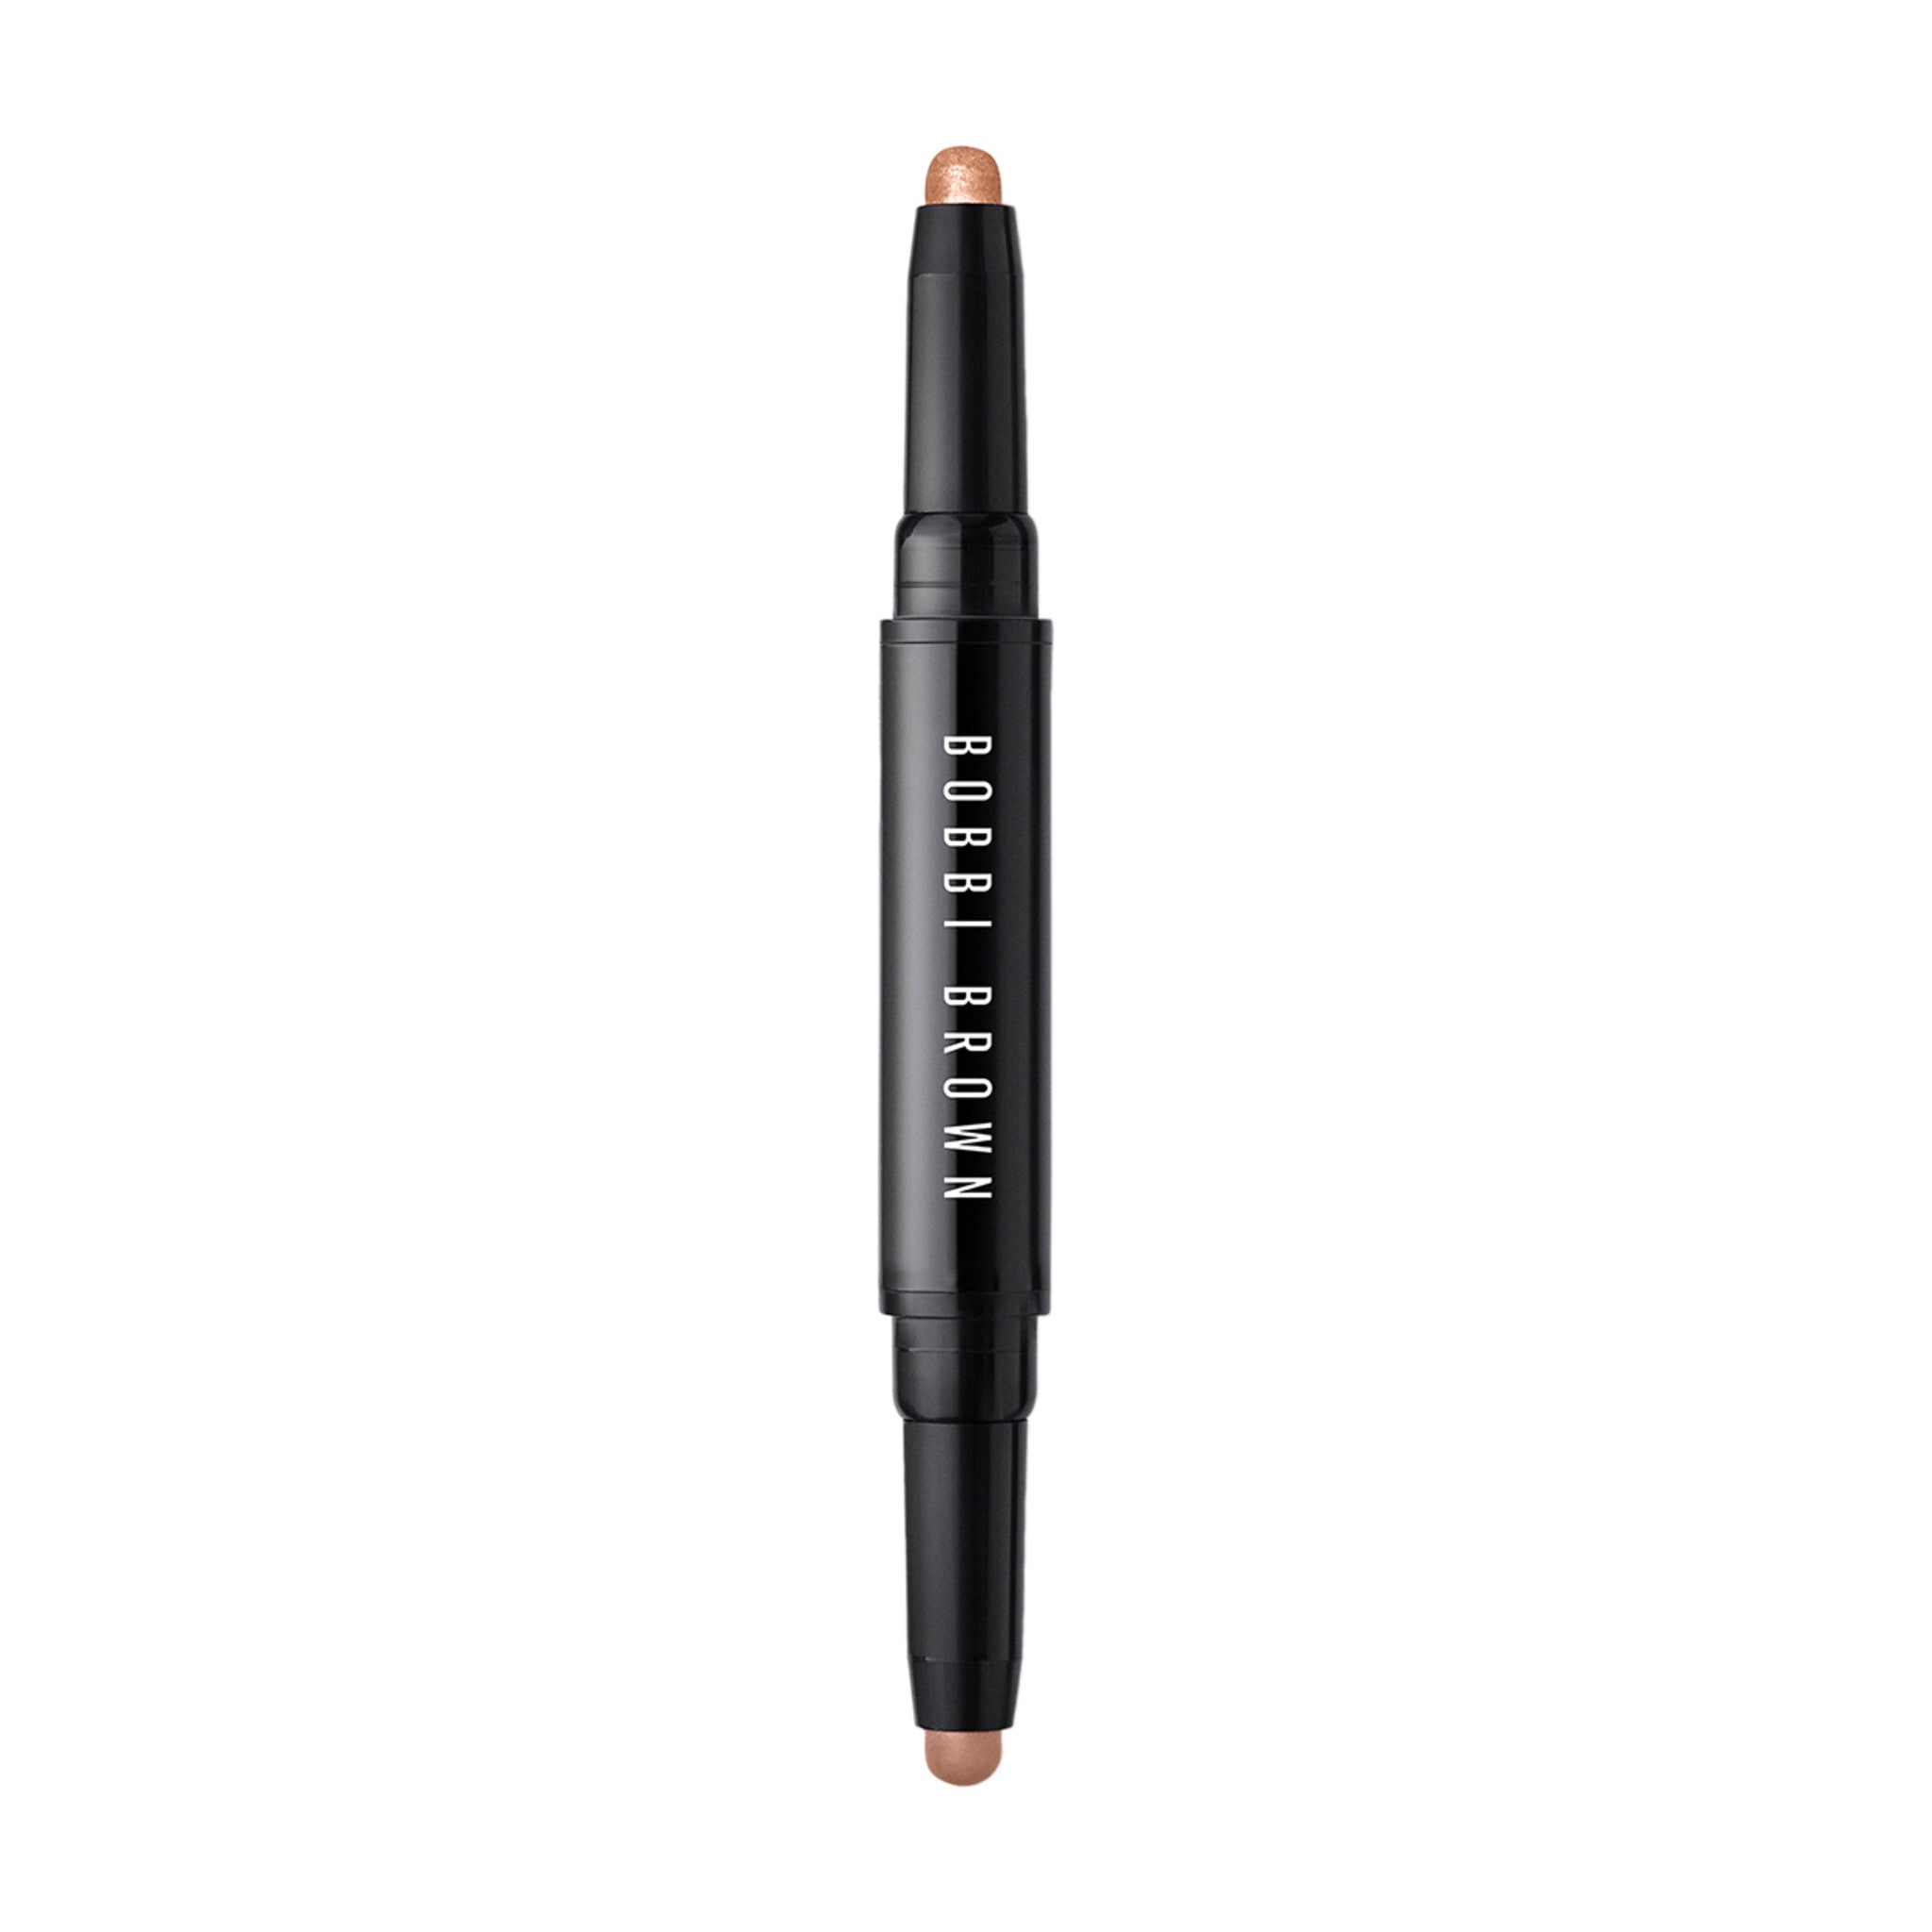 Bobbi Brown Dual-Ended Long-Wear Cream Shadow Stick Color/Shade variant: Golden Pink/Taupe  main image.